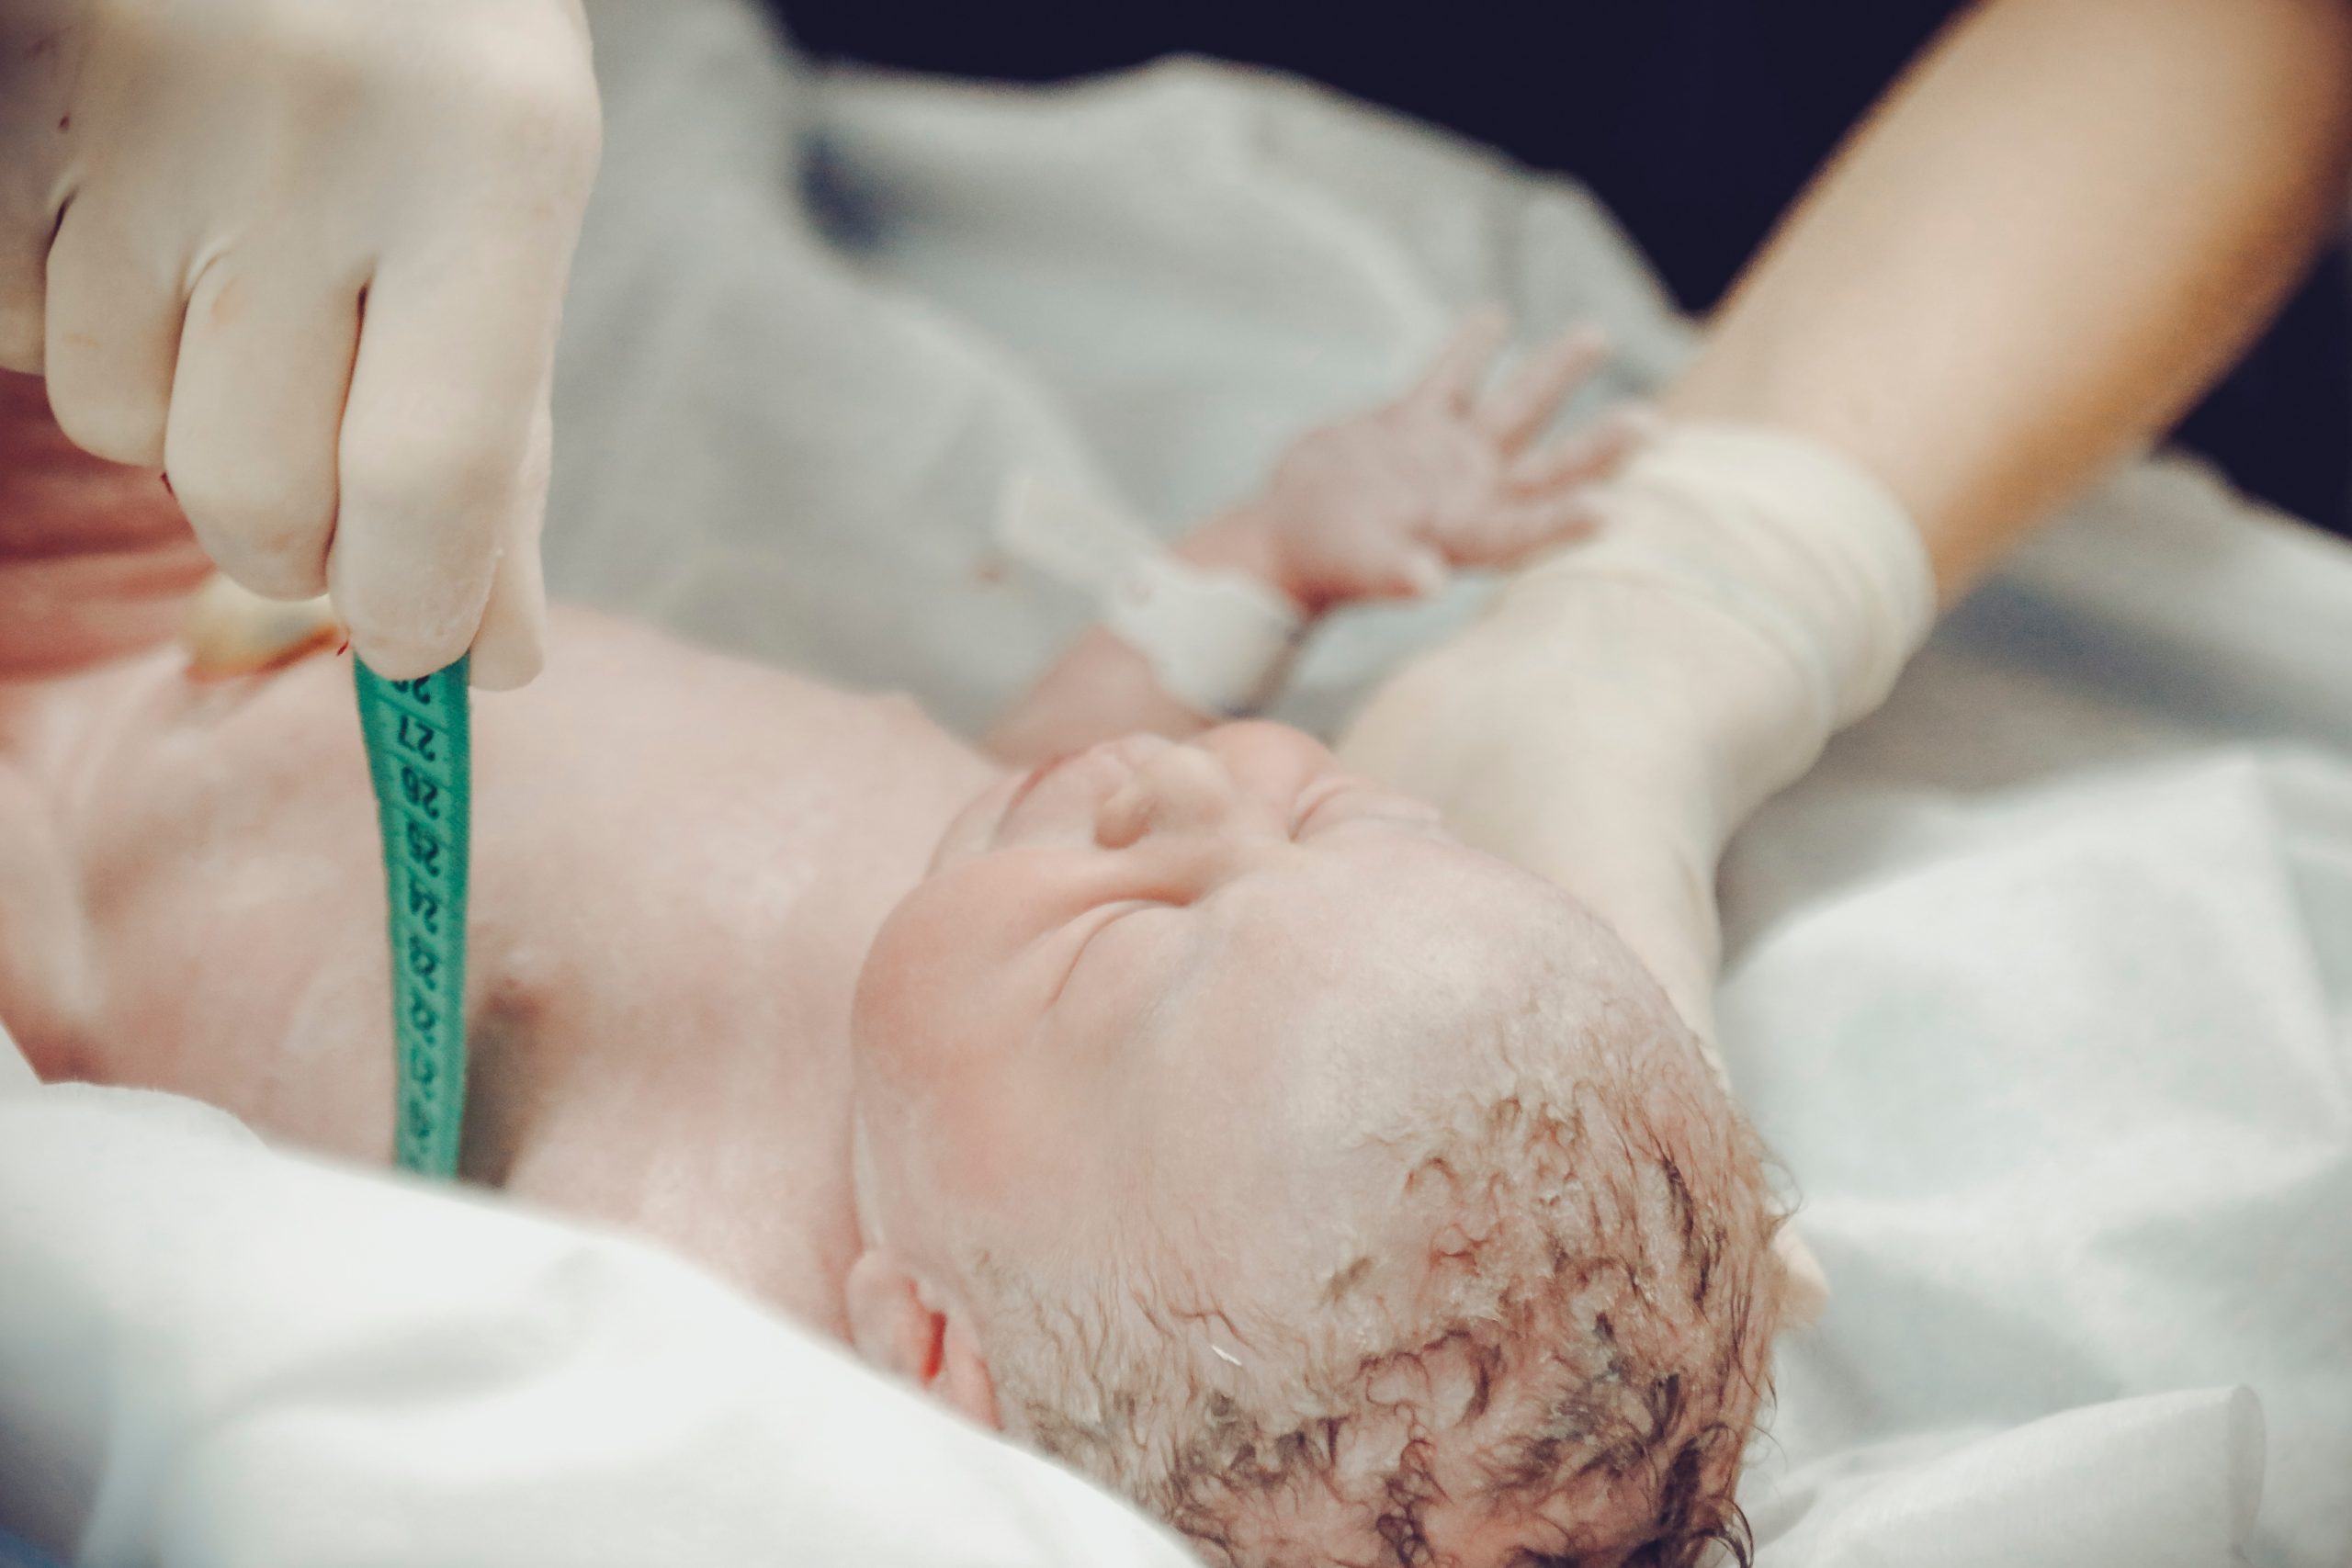 Can overventilation in NICUs cause birth injuries?